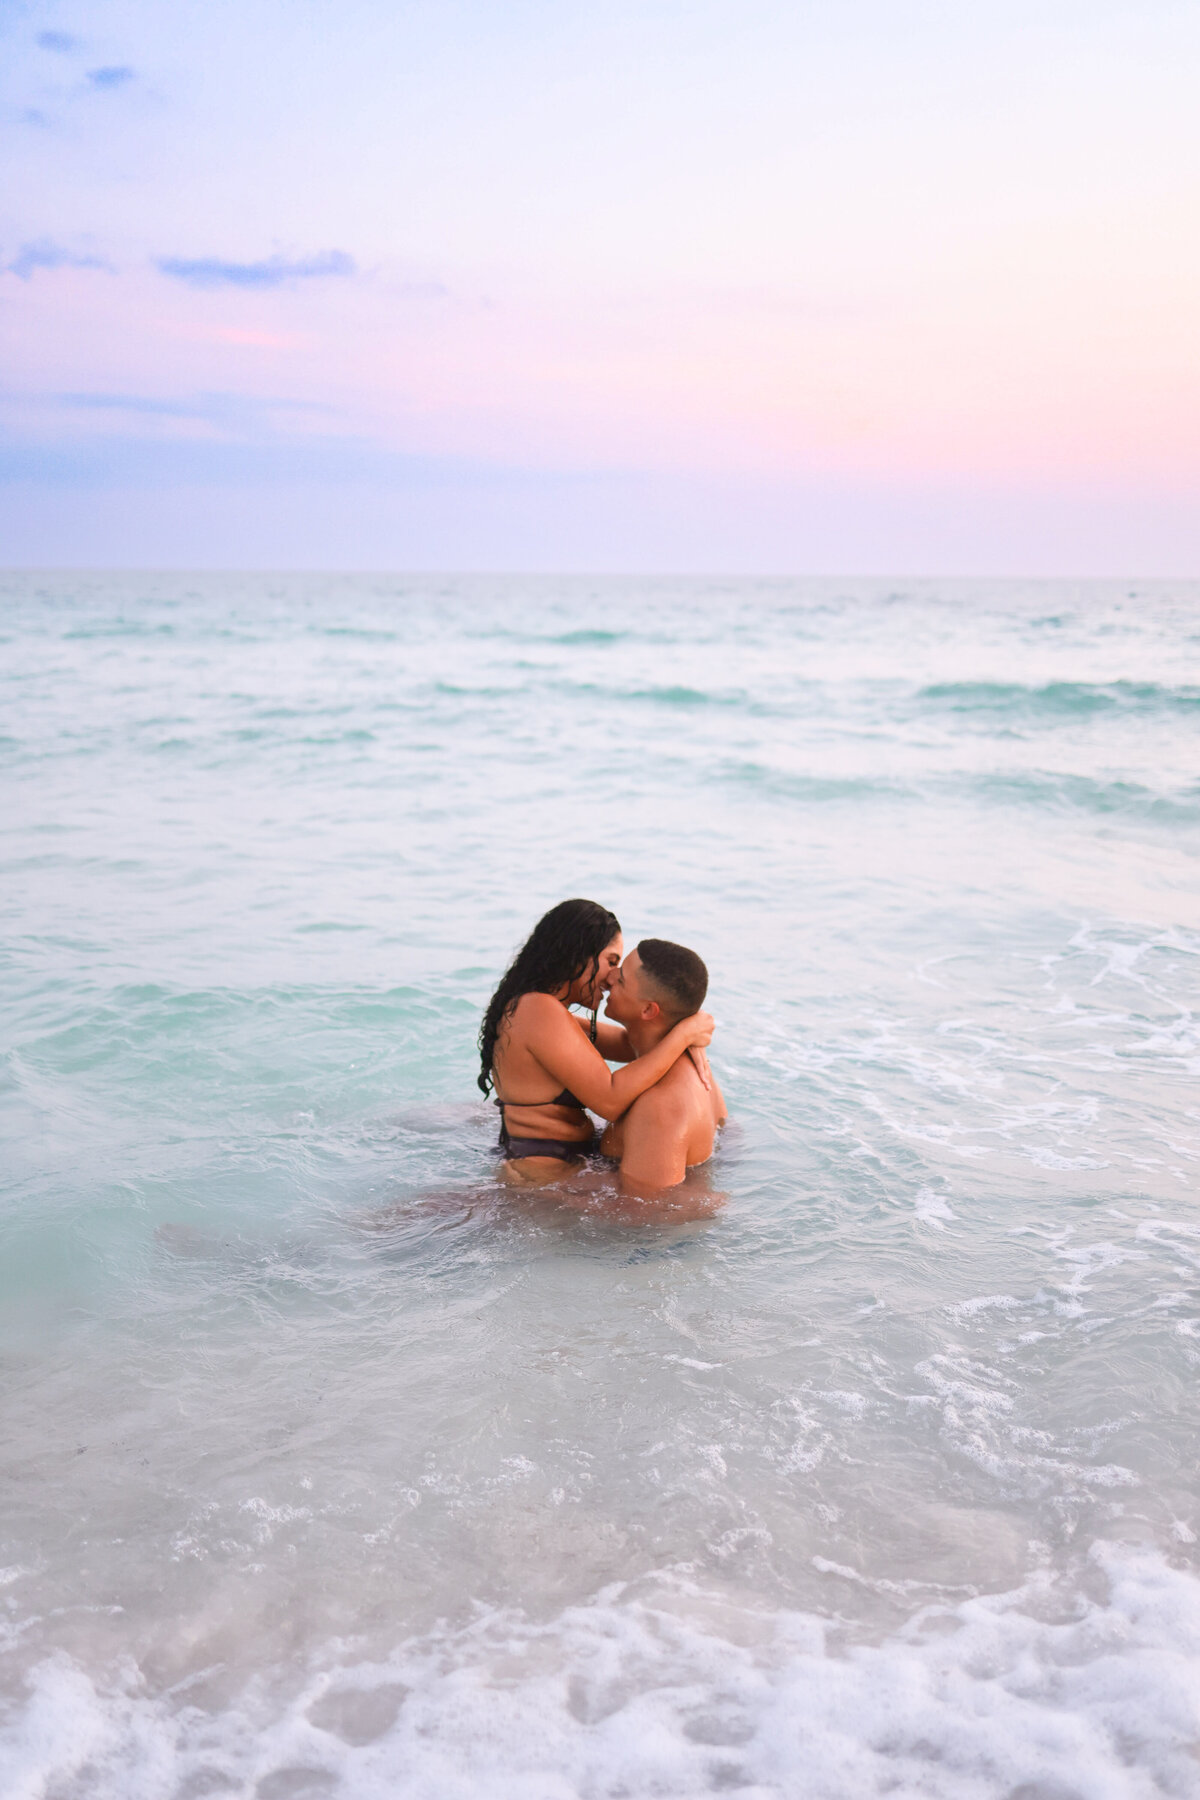 man and woman sitting in ocean kissing while wearing bathing suits